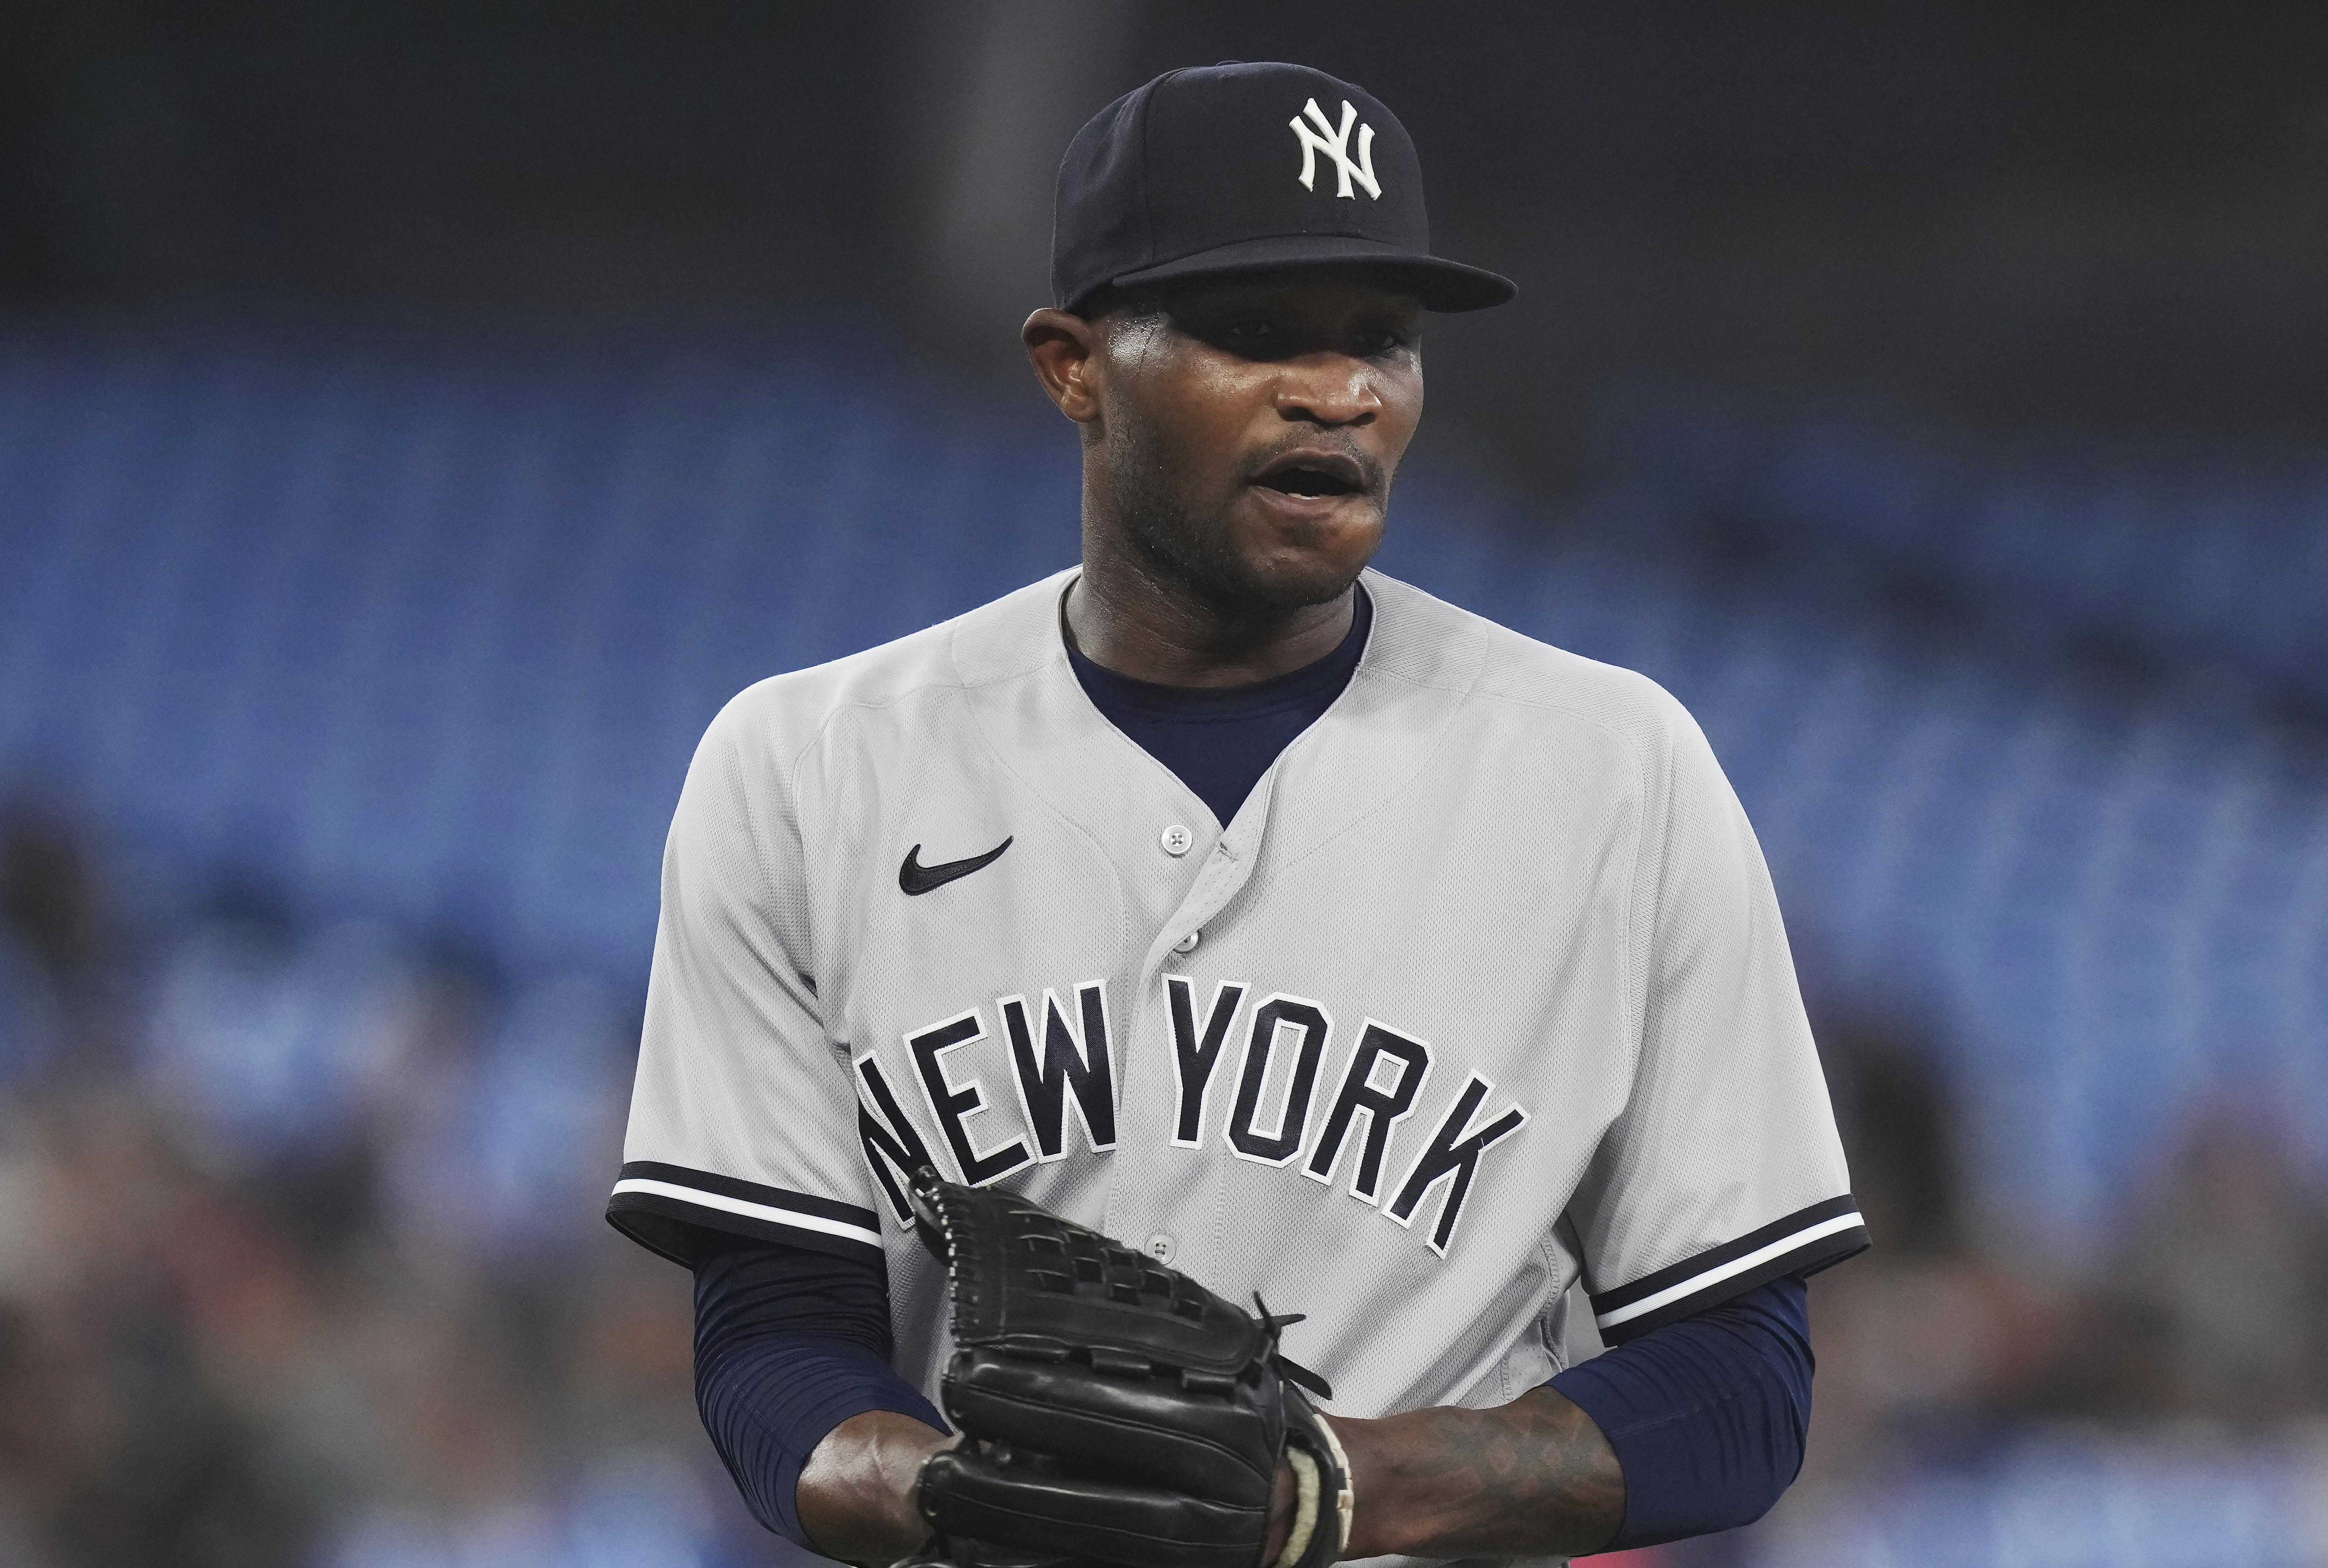 Domingo German suspended 10 games by MLB for using foreign substance